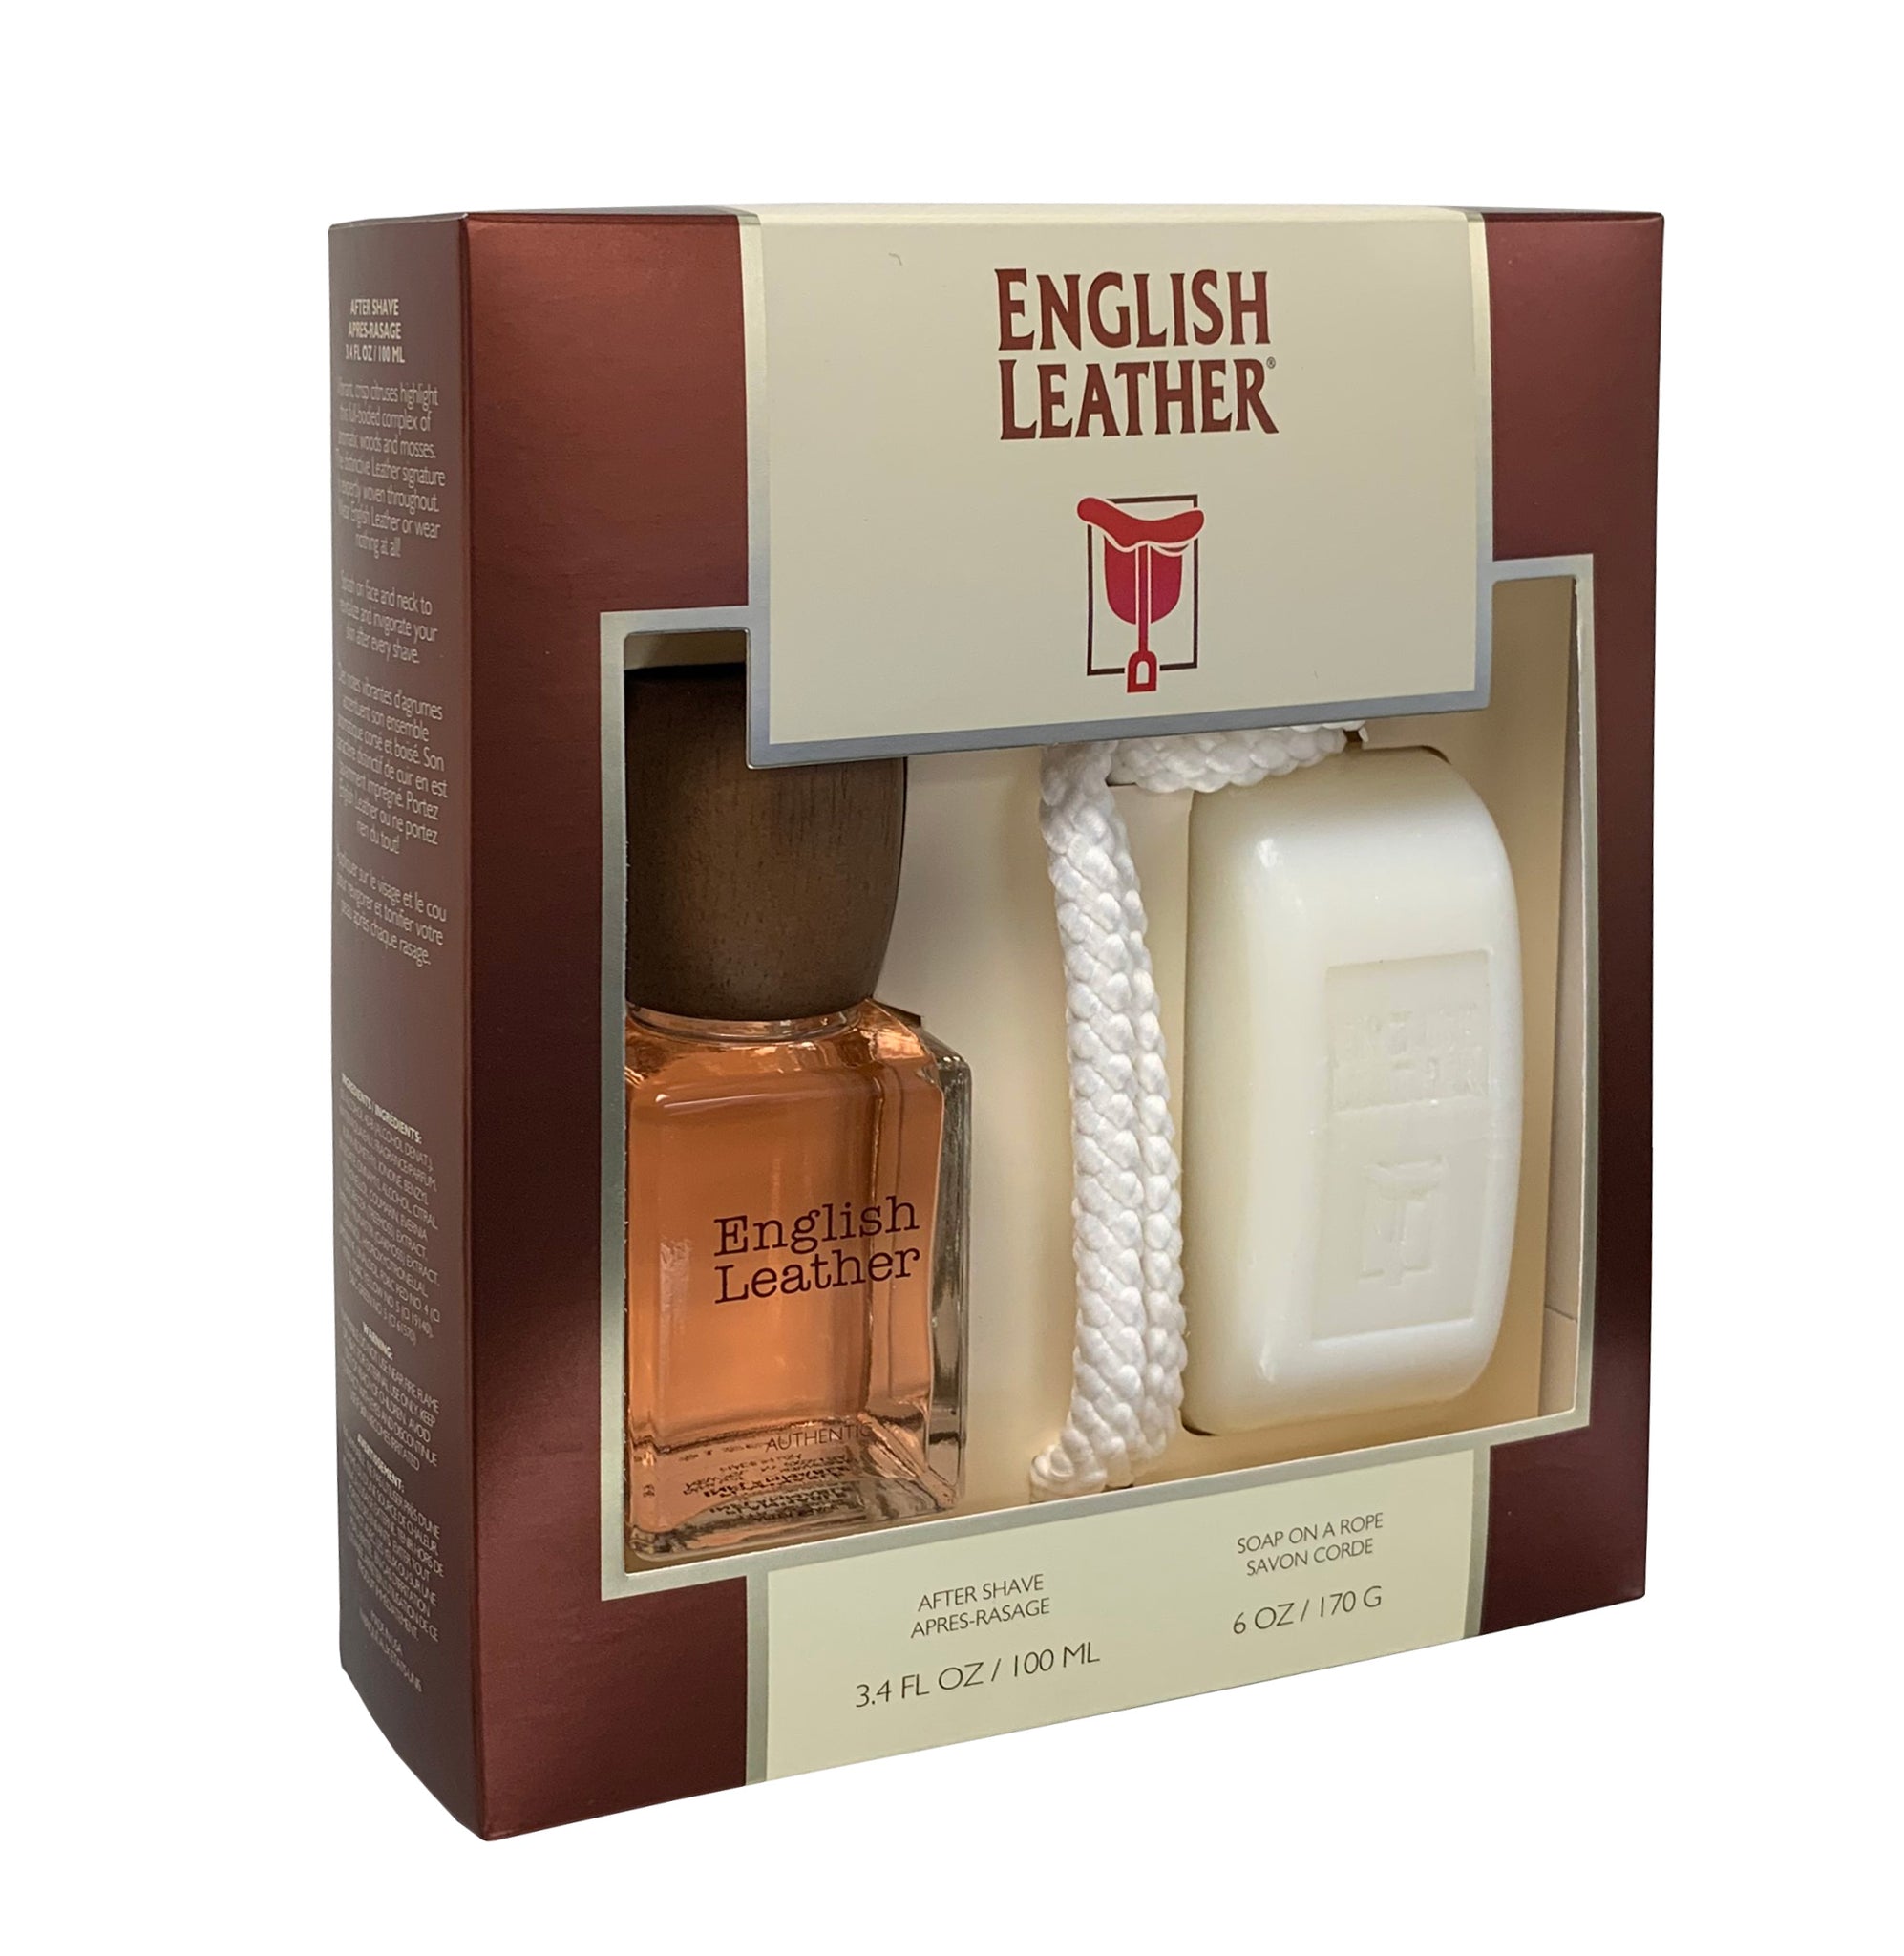 ENGLISH LEATHER 2-PIECE GIFT SET (actual value $24.99)